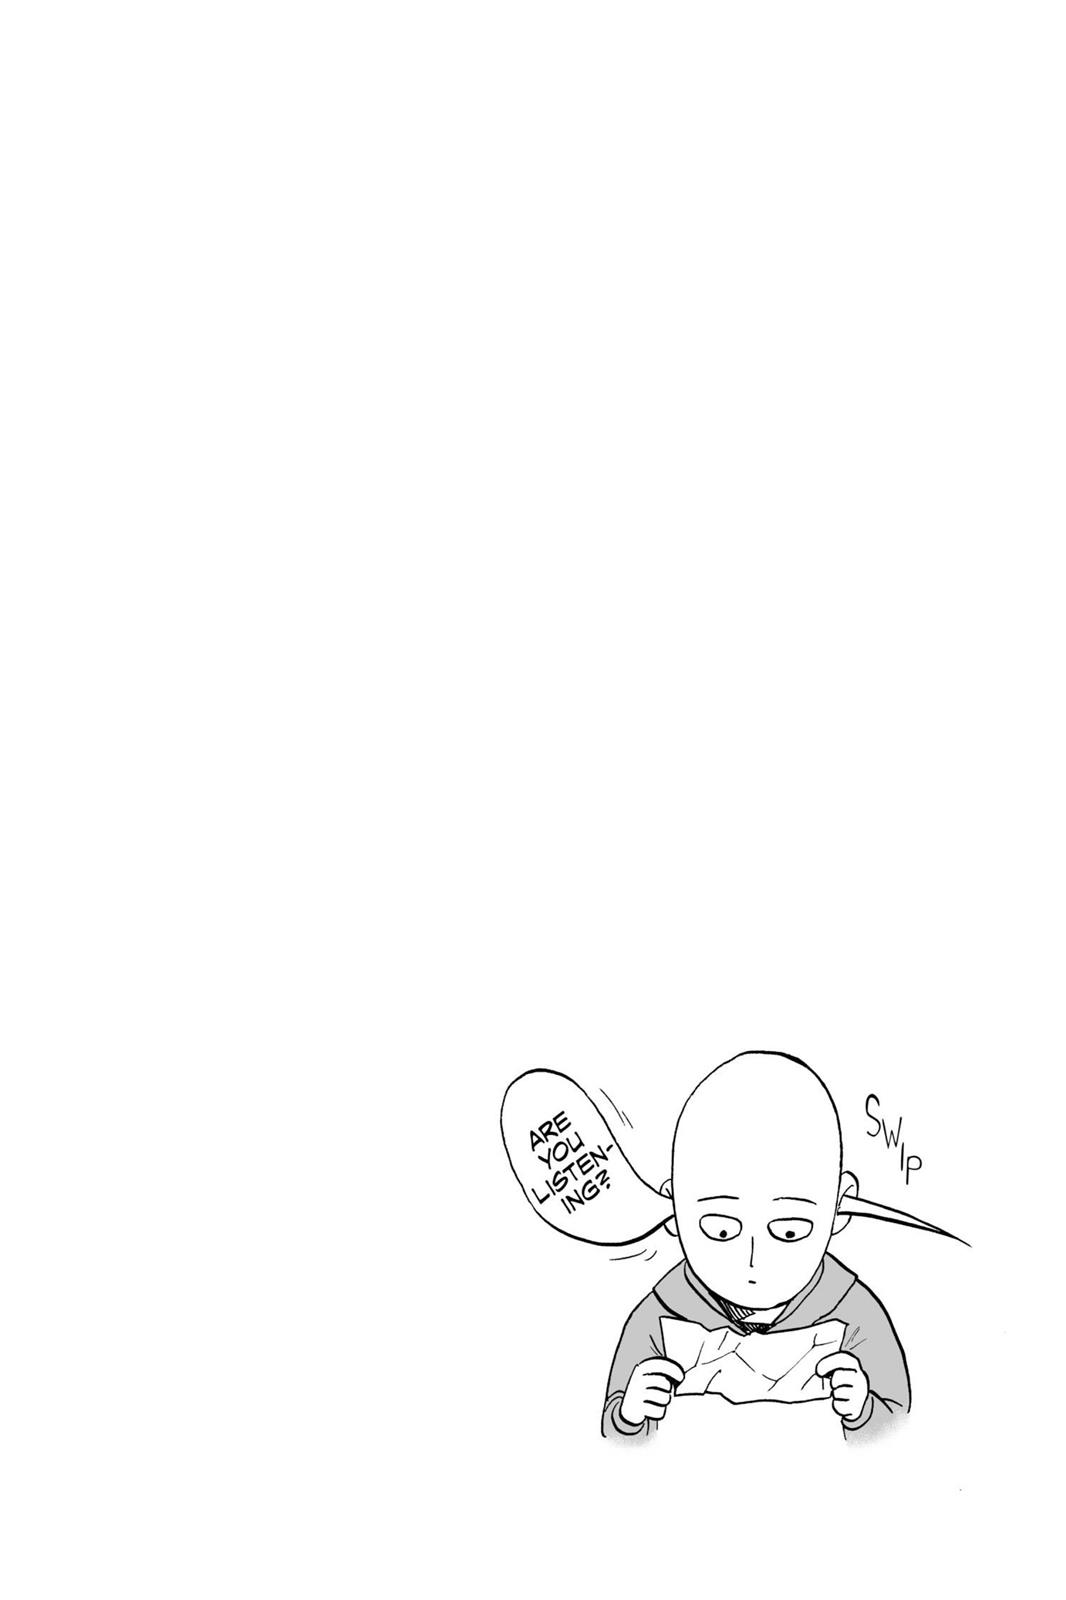 One-Punch Man, Punch 49 image 13